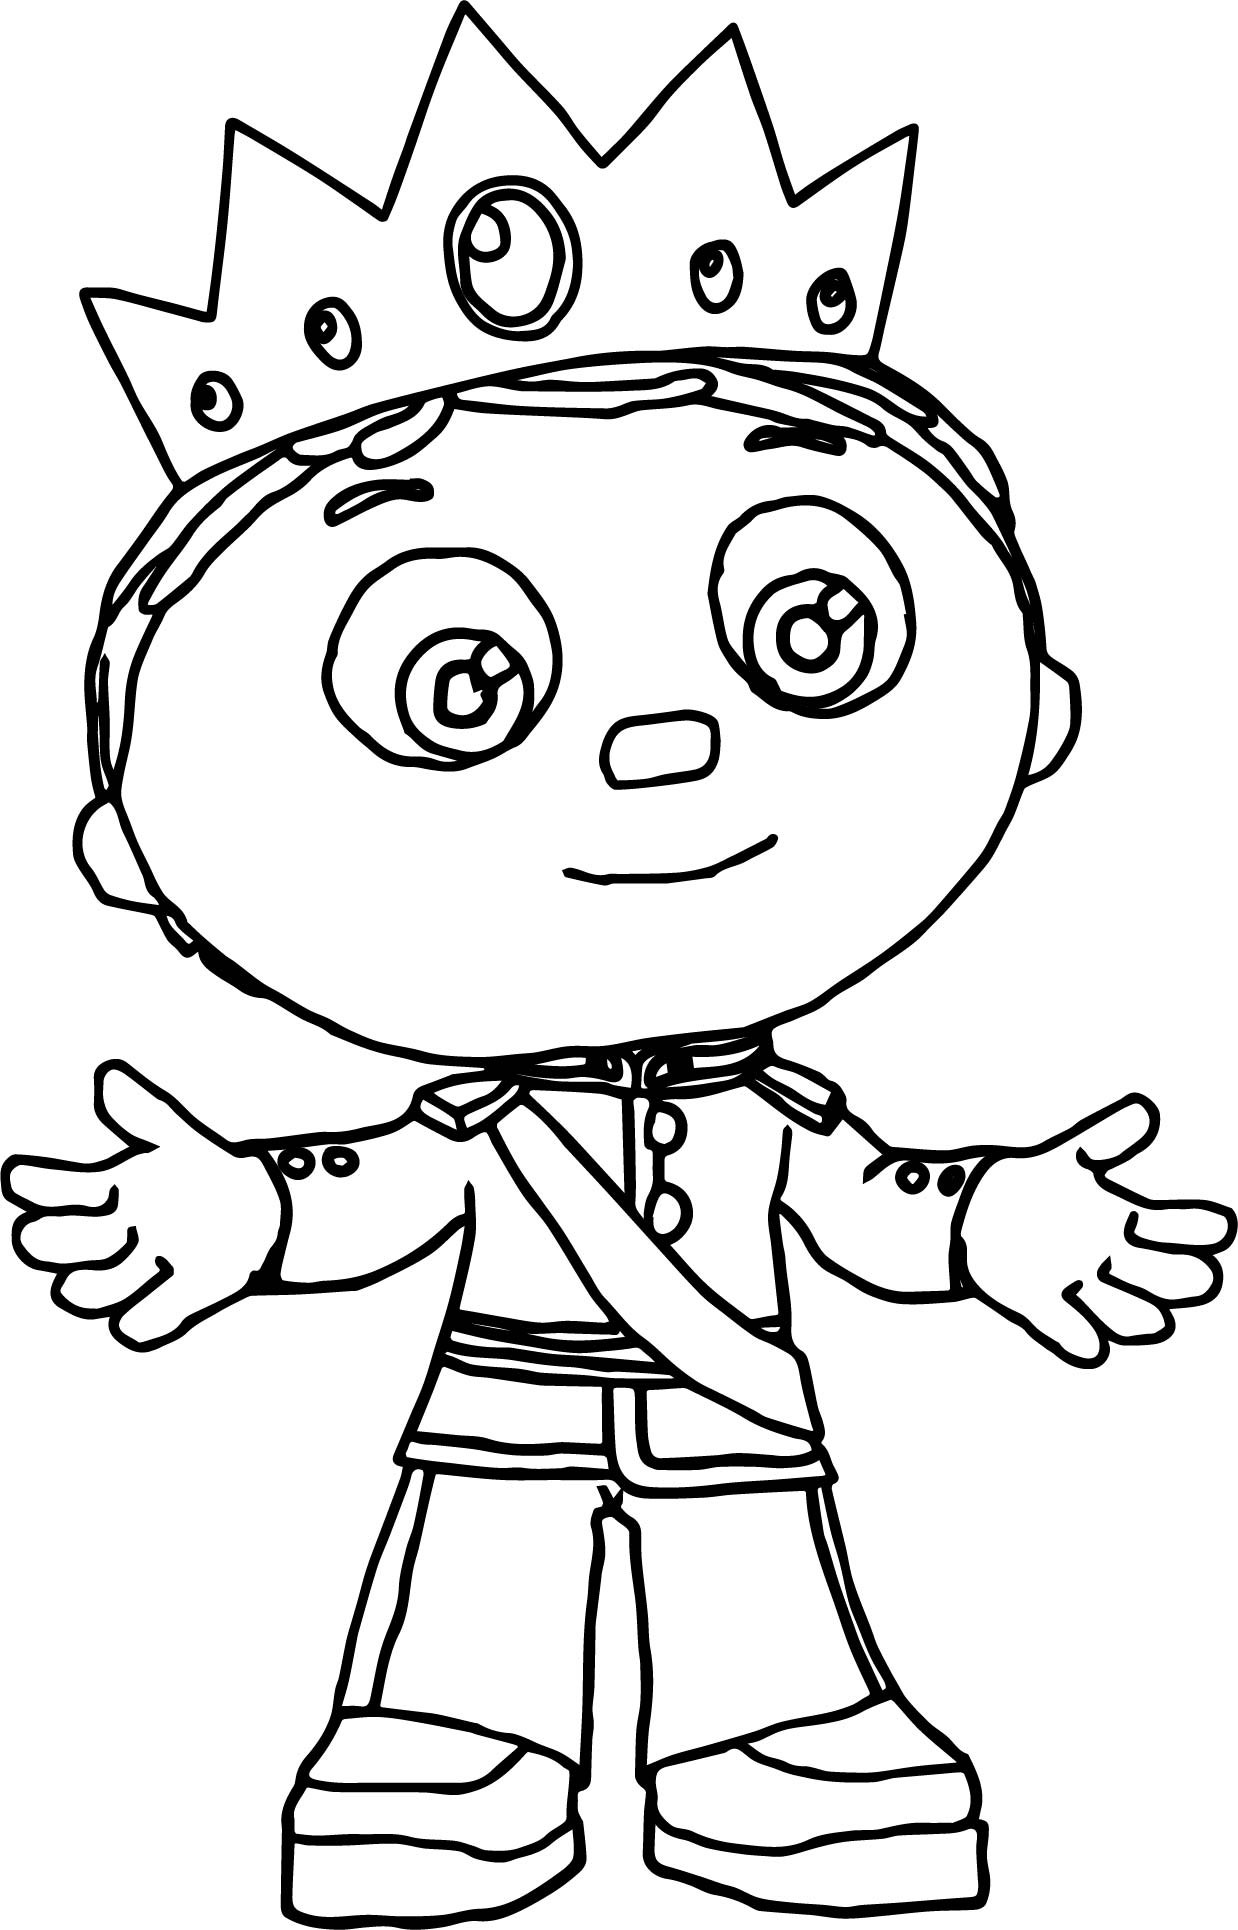 Kids Coloring Page
 Super Why Coloring Pages Best Coloring Pages For Kids